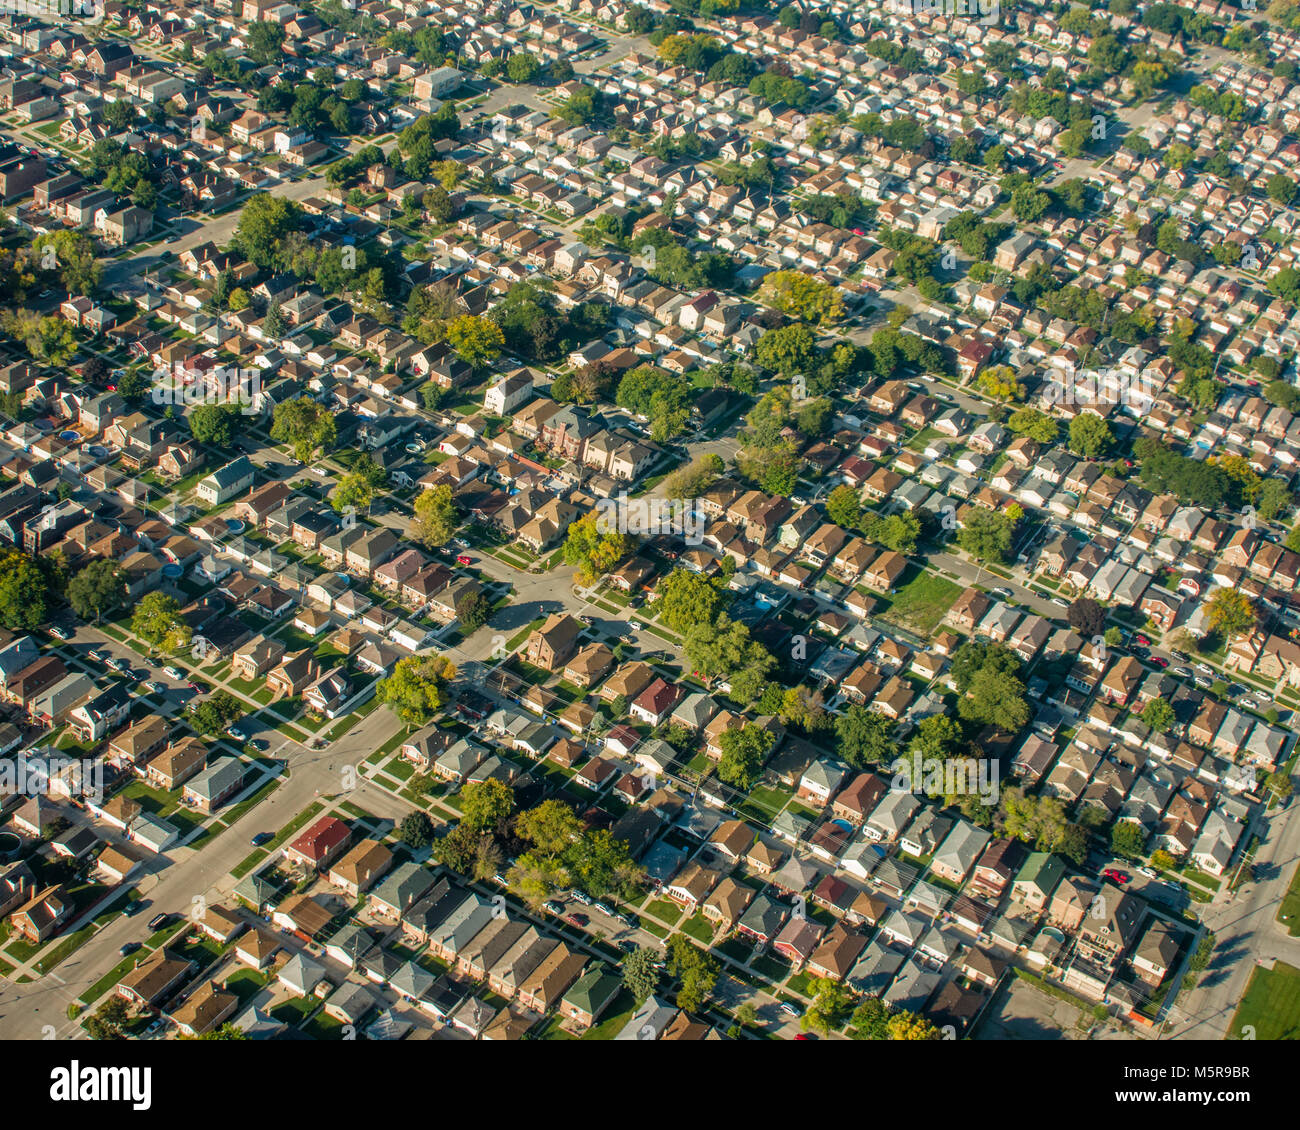 Aerial View Of Typical Suburban Neighborhood With Densely Packed Houses